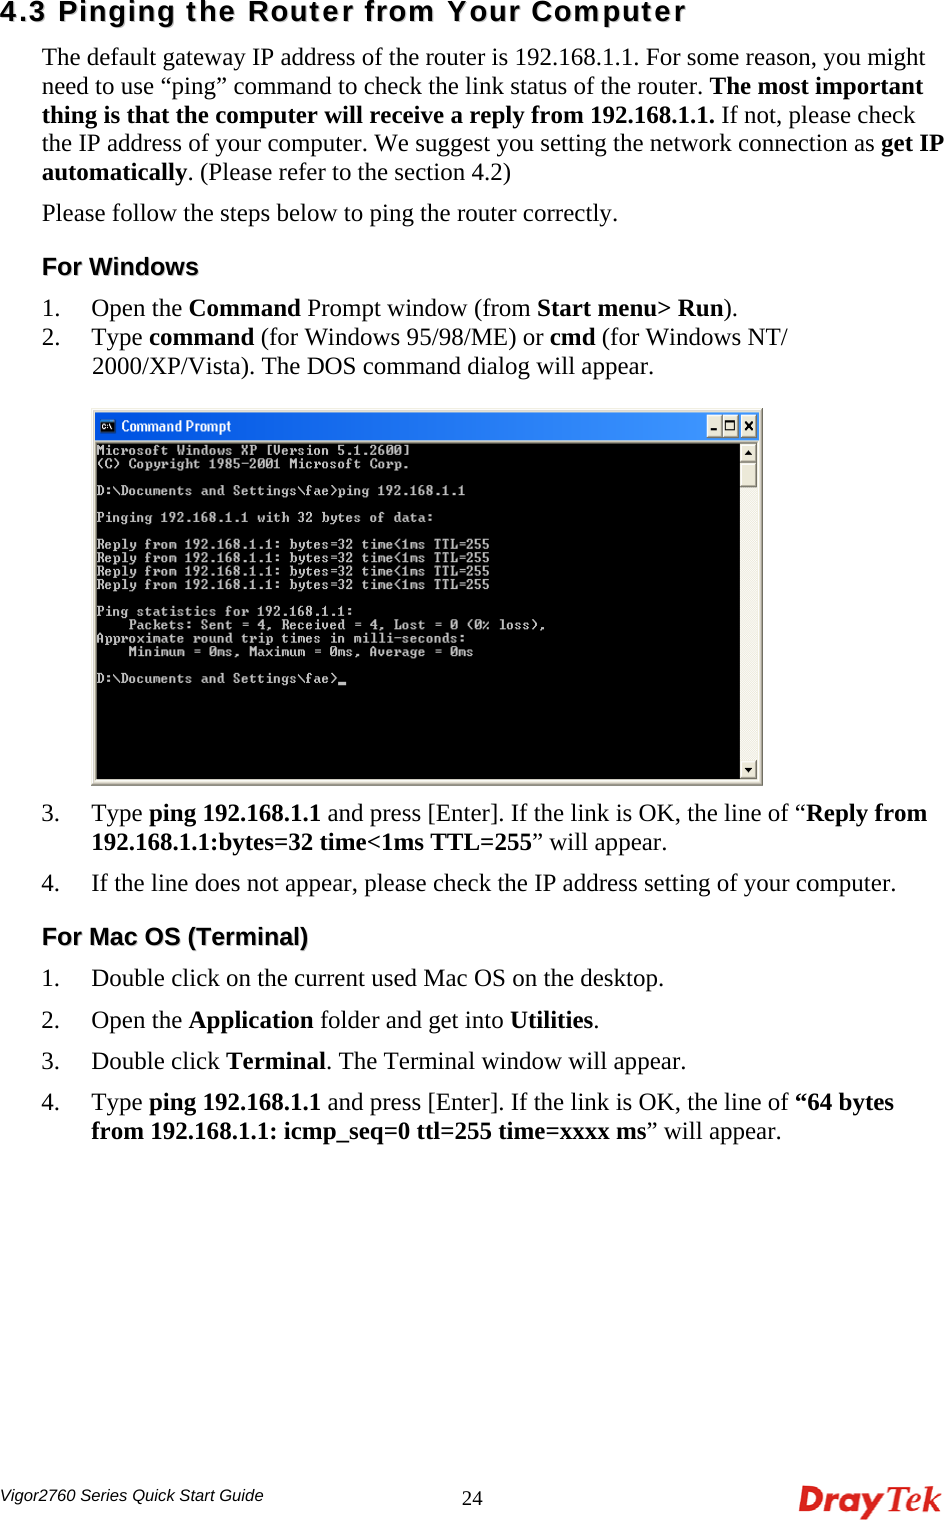  Vigor2760 Series Quick Start Guide 2444..33  PPiinnggiinngg  tthhee  RRoouutteerr  ffrroomm  YYoouurr  CCoommppuutteerr  The default gateway IP address of the router is 192.168.1.1. For some reason, you might need to use “ping” command to check the link status of the router. The most important thing is that the computer will receive a reply from 192.168.1.1. If not, please check the IP address of your computer. We suggest you setting the network connection as get IP automatically. (Please refer to the section 4.2) Please follow the steps below to ping the router correctly. FFoorr  WWiinnddoowwss  1. Open the Command Prompt window (from Start menu&gt; Run). 2. Type command (for Windows 95/98/ME) or cmd (for Windows NT/ 2000/XP/Vista). The DOS command dialog will appear.   3. Type ping 192.168.1.1 and press [Enter]. If the link is OK, the line of “Reply from 192.168.1.1:bytes=32 time&lt;1ms TTL=255” will appear.   4. If the line does not appear, please check the IP address setting of your computer.   FFoorr  MMaacc  OOSS  ((TTeerrmmiinnaall))  1. Double click on the current used Mac OS on the desktop.   2. Open the Application folder and get into Utilities. 3. Double click Terminal. The Terminal window will appear. 4. Type ping 192.168.1.1 and press [Enter]. If the link is OK, the line of “64 bytes from 192.168.1.1: icmp_seq=0 ttl=255 time=xxxx ms” will appear.     